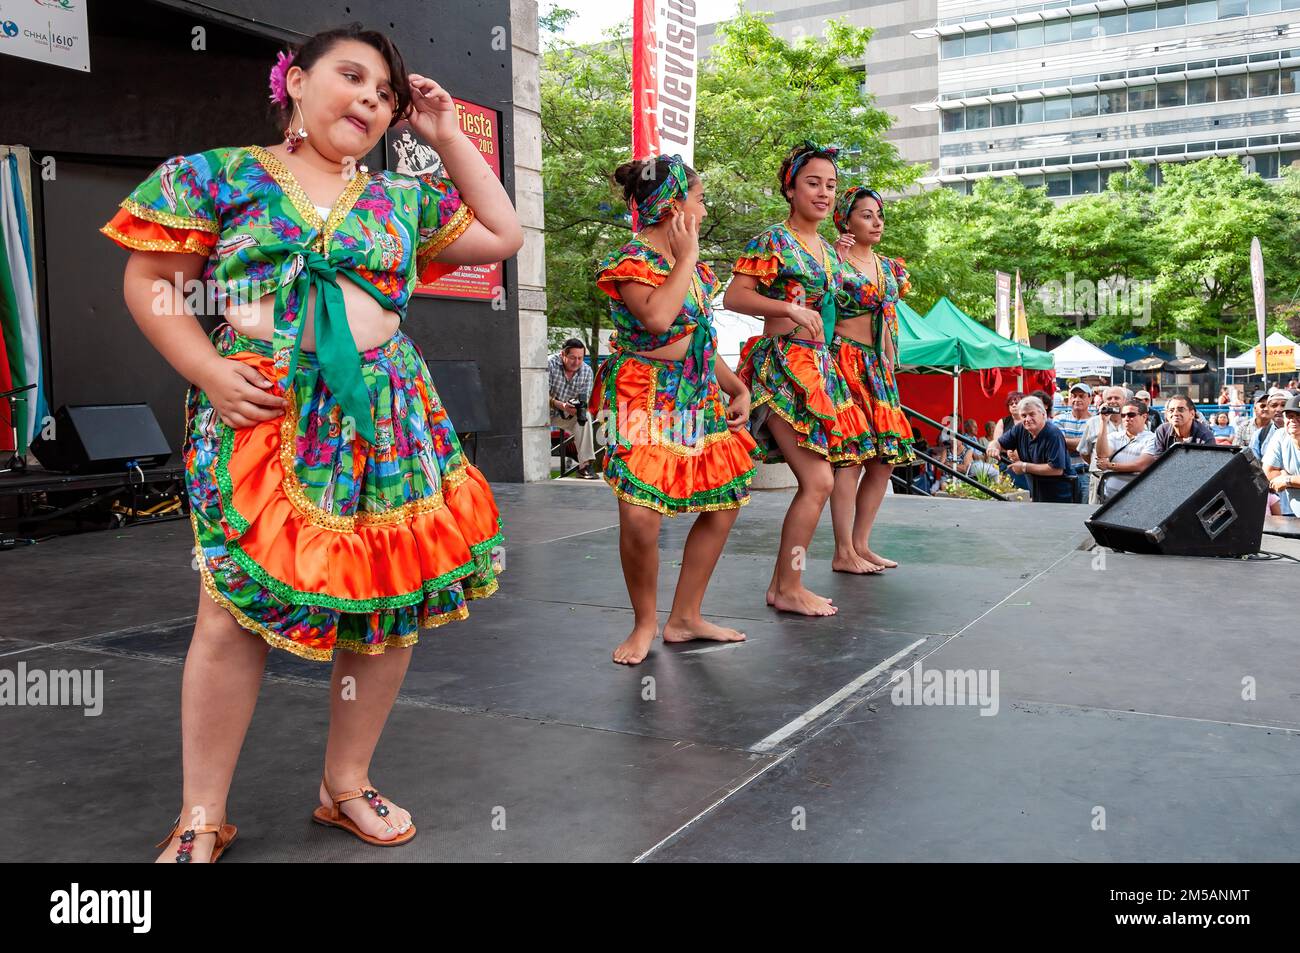 A group of female children wearing Latin American traditional clothes dance in the stage. The annual event is held in Mel Lastman square. Stock Photo